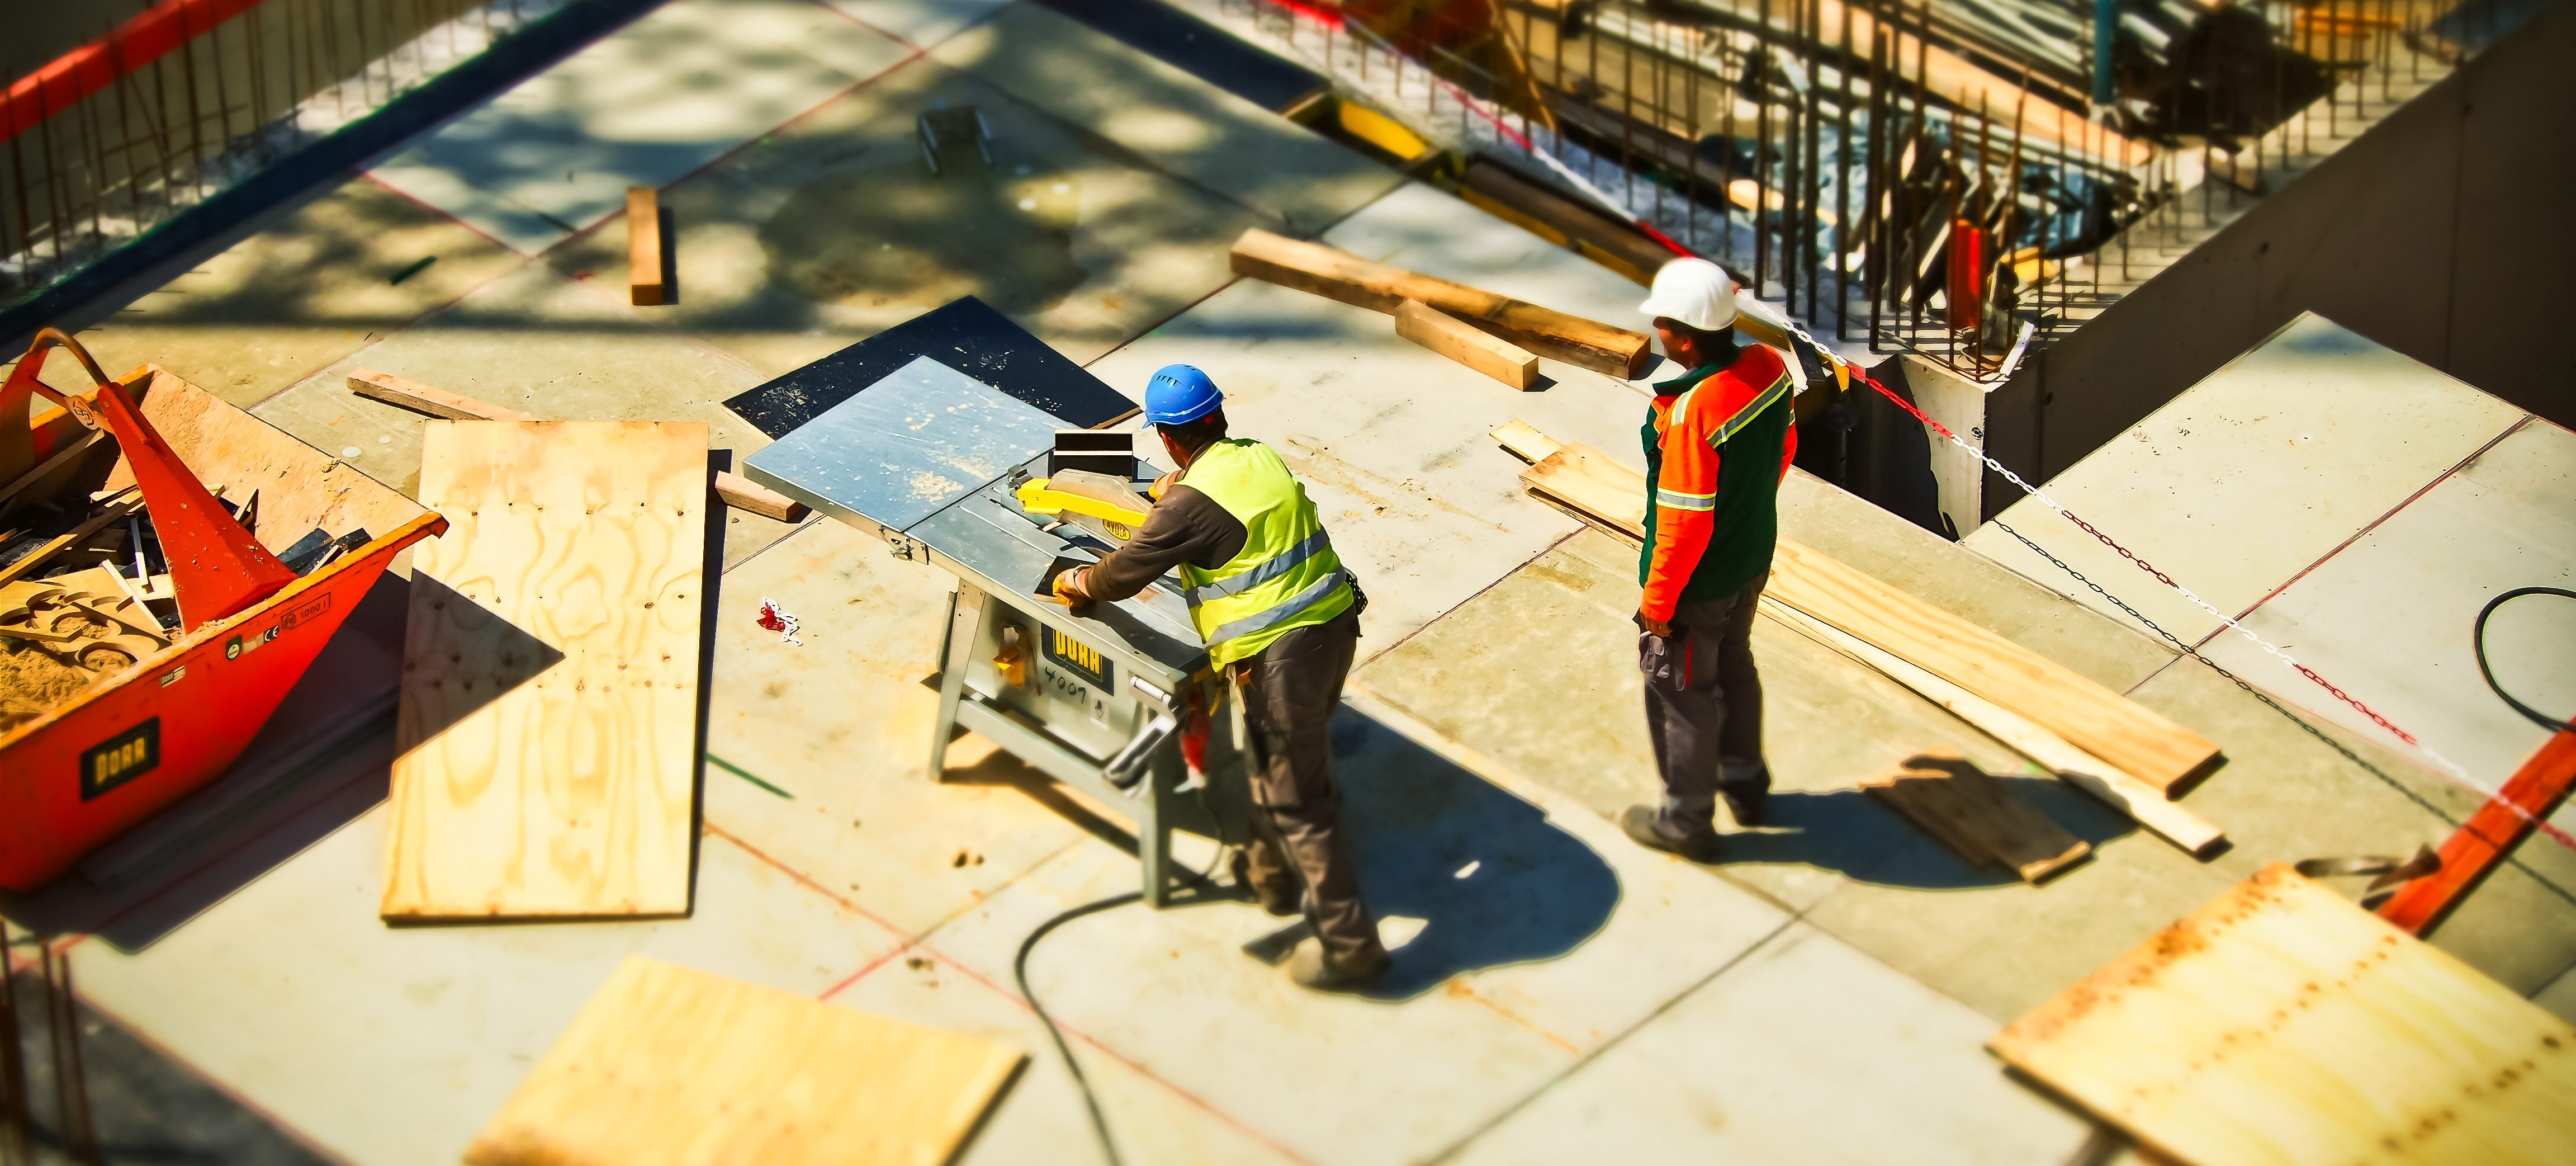 ﻿Important Things Every Construction Worker Should Know About